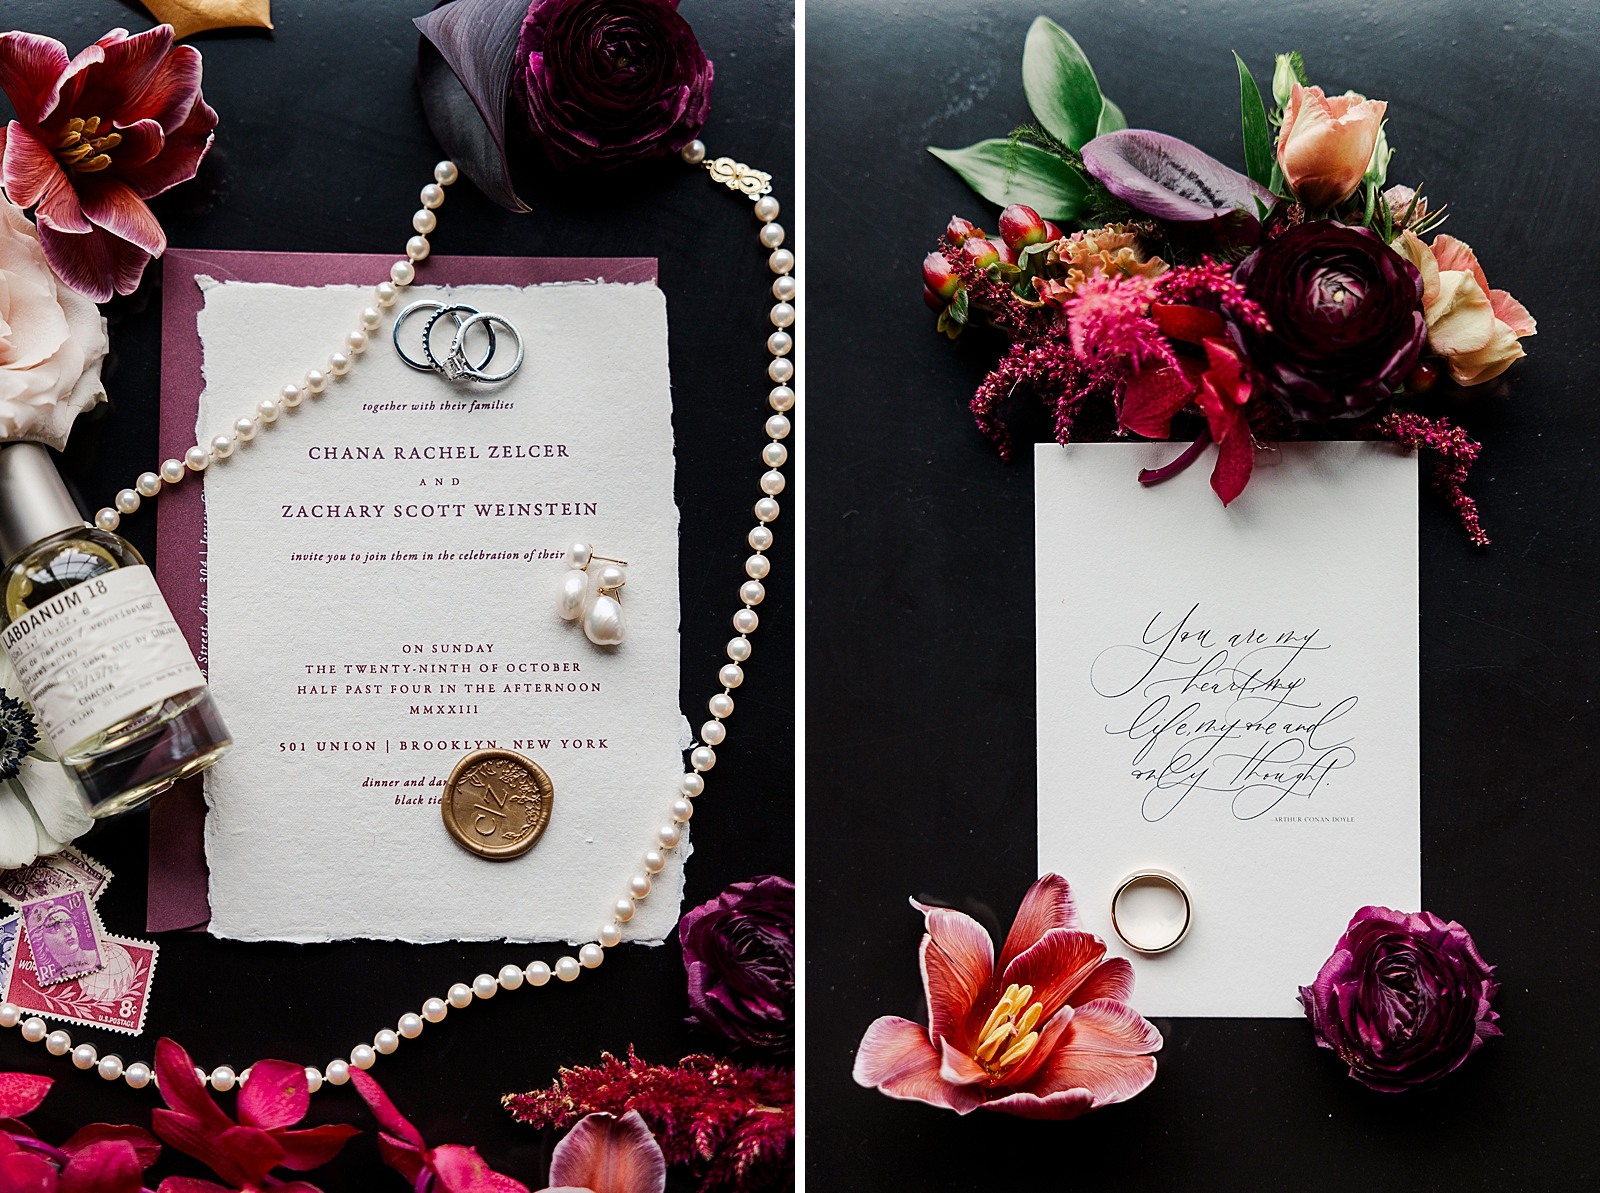 Left photo: Close up shot of wedding details, including jewelry, flowers, and a wedding invitation. 
Right photo: Close up shot of a printed Arthur Conan Doyle quote, as well as flowers and the groom's wedding ring.